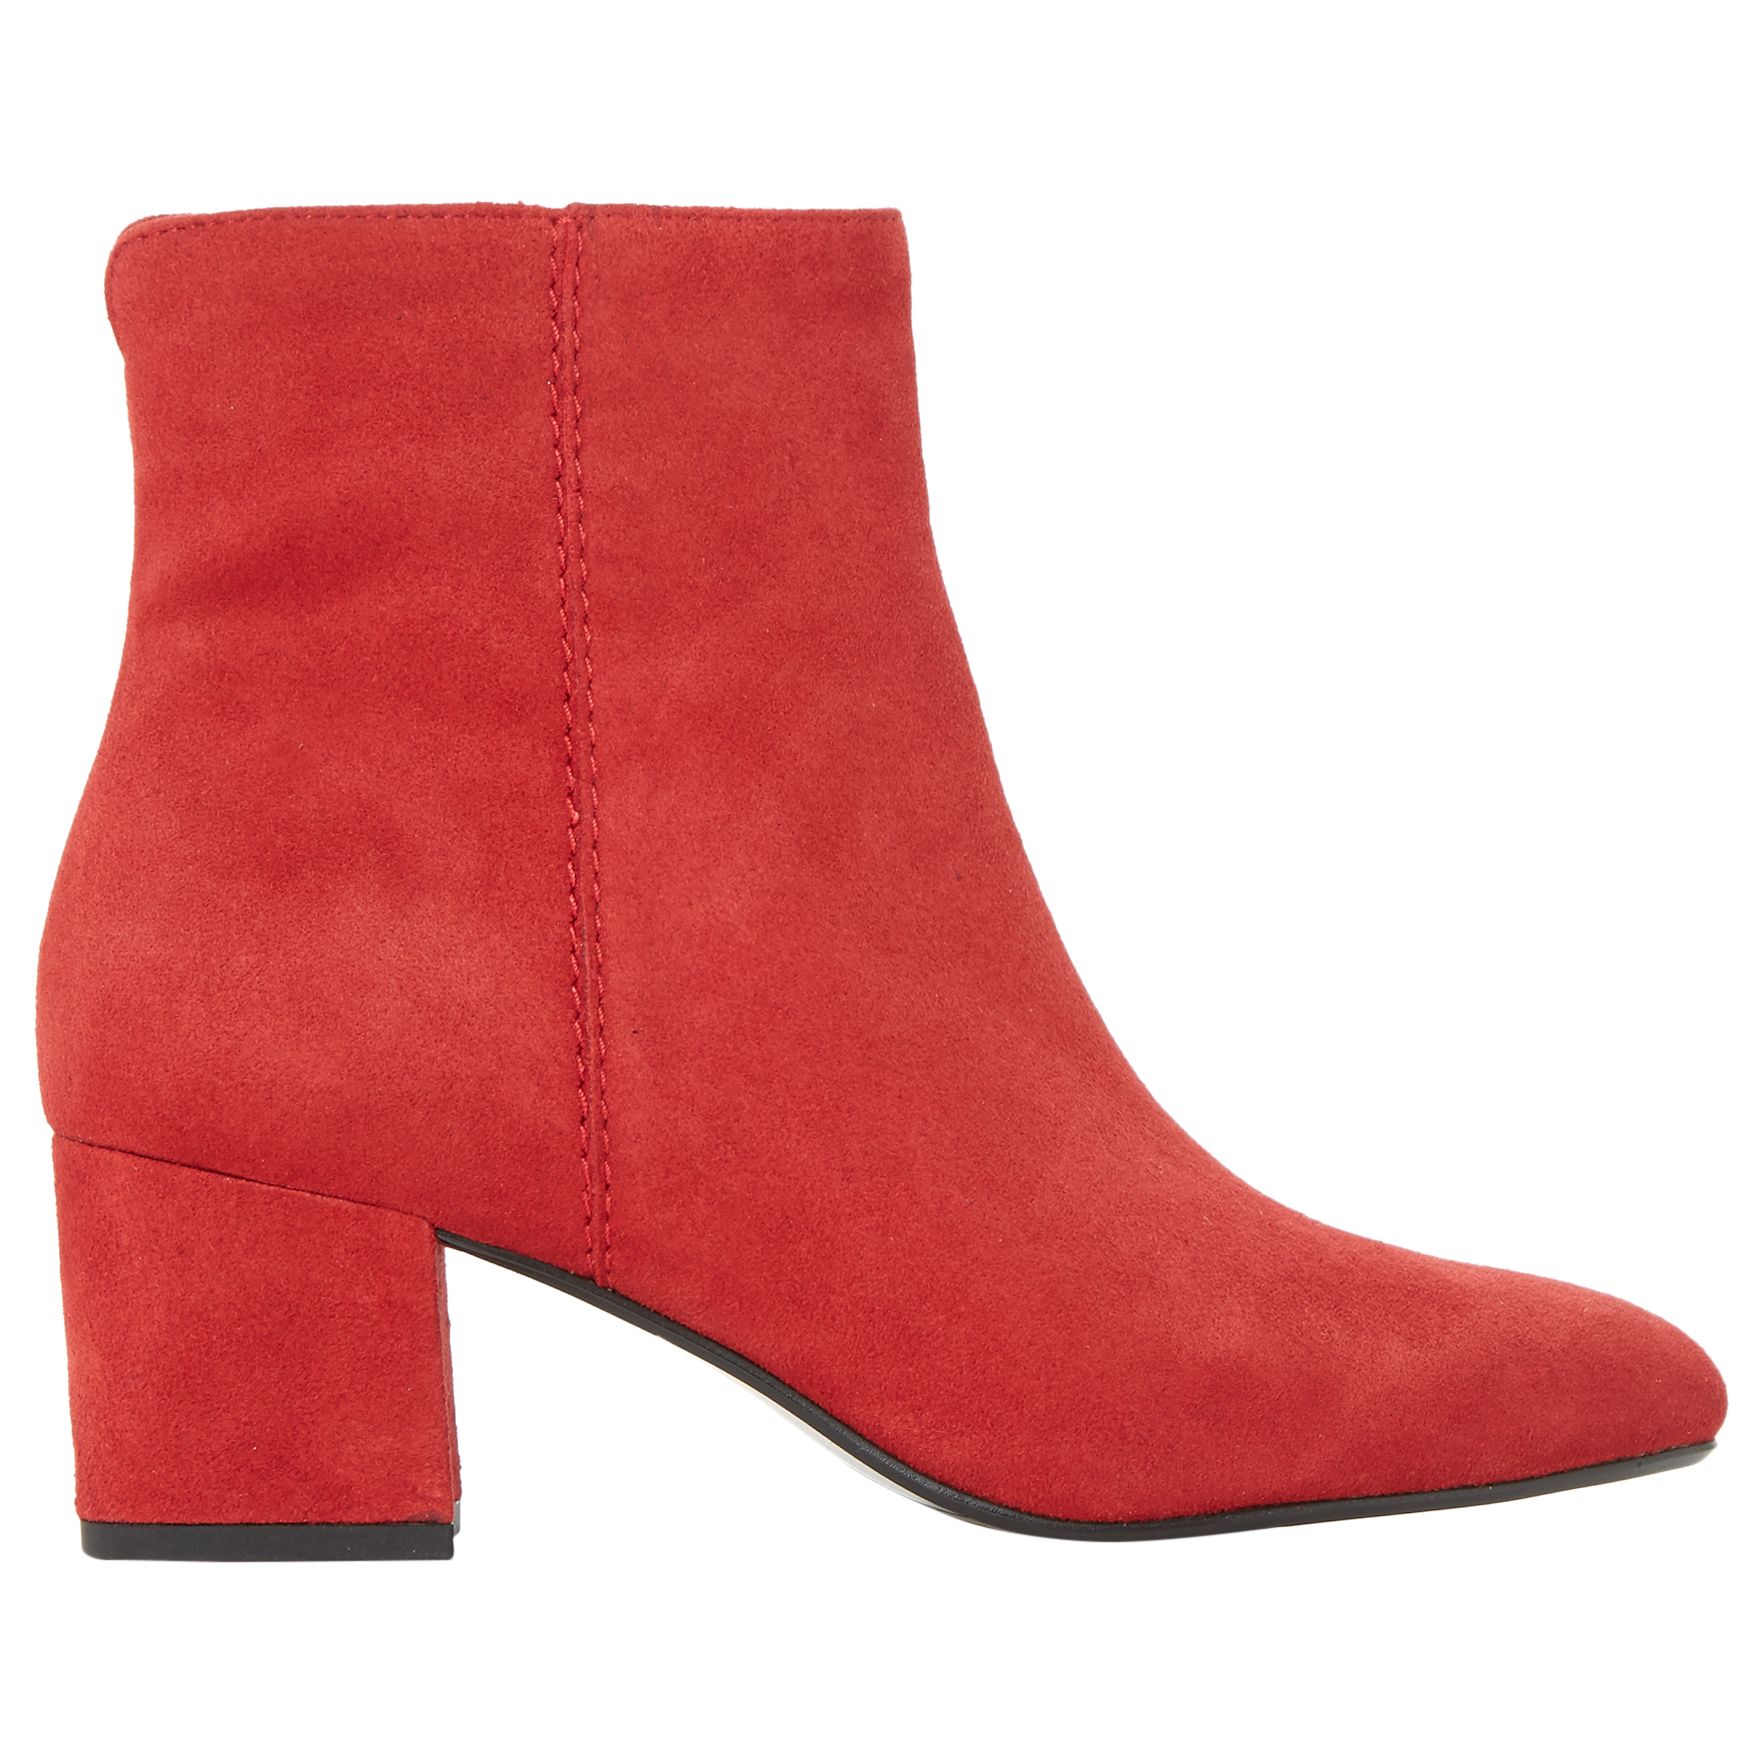 Dune Olyvea Block Heeled Ankle Boots, Red Suede, 5